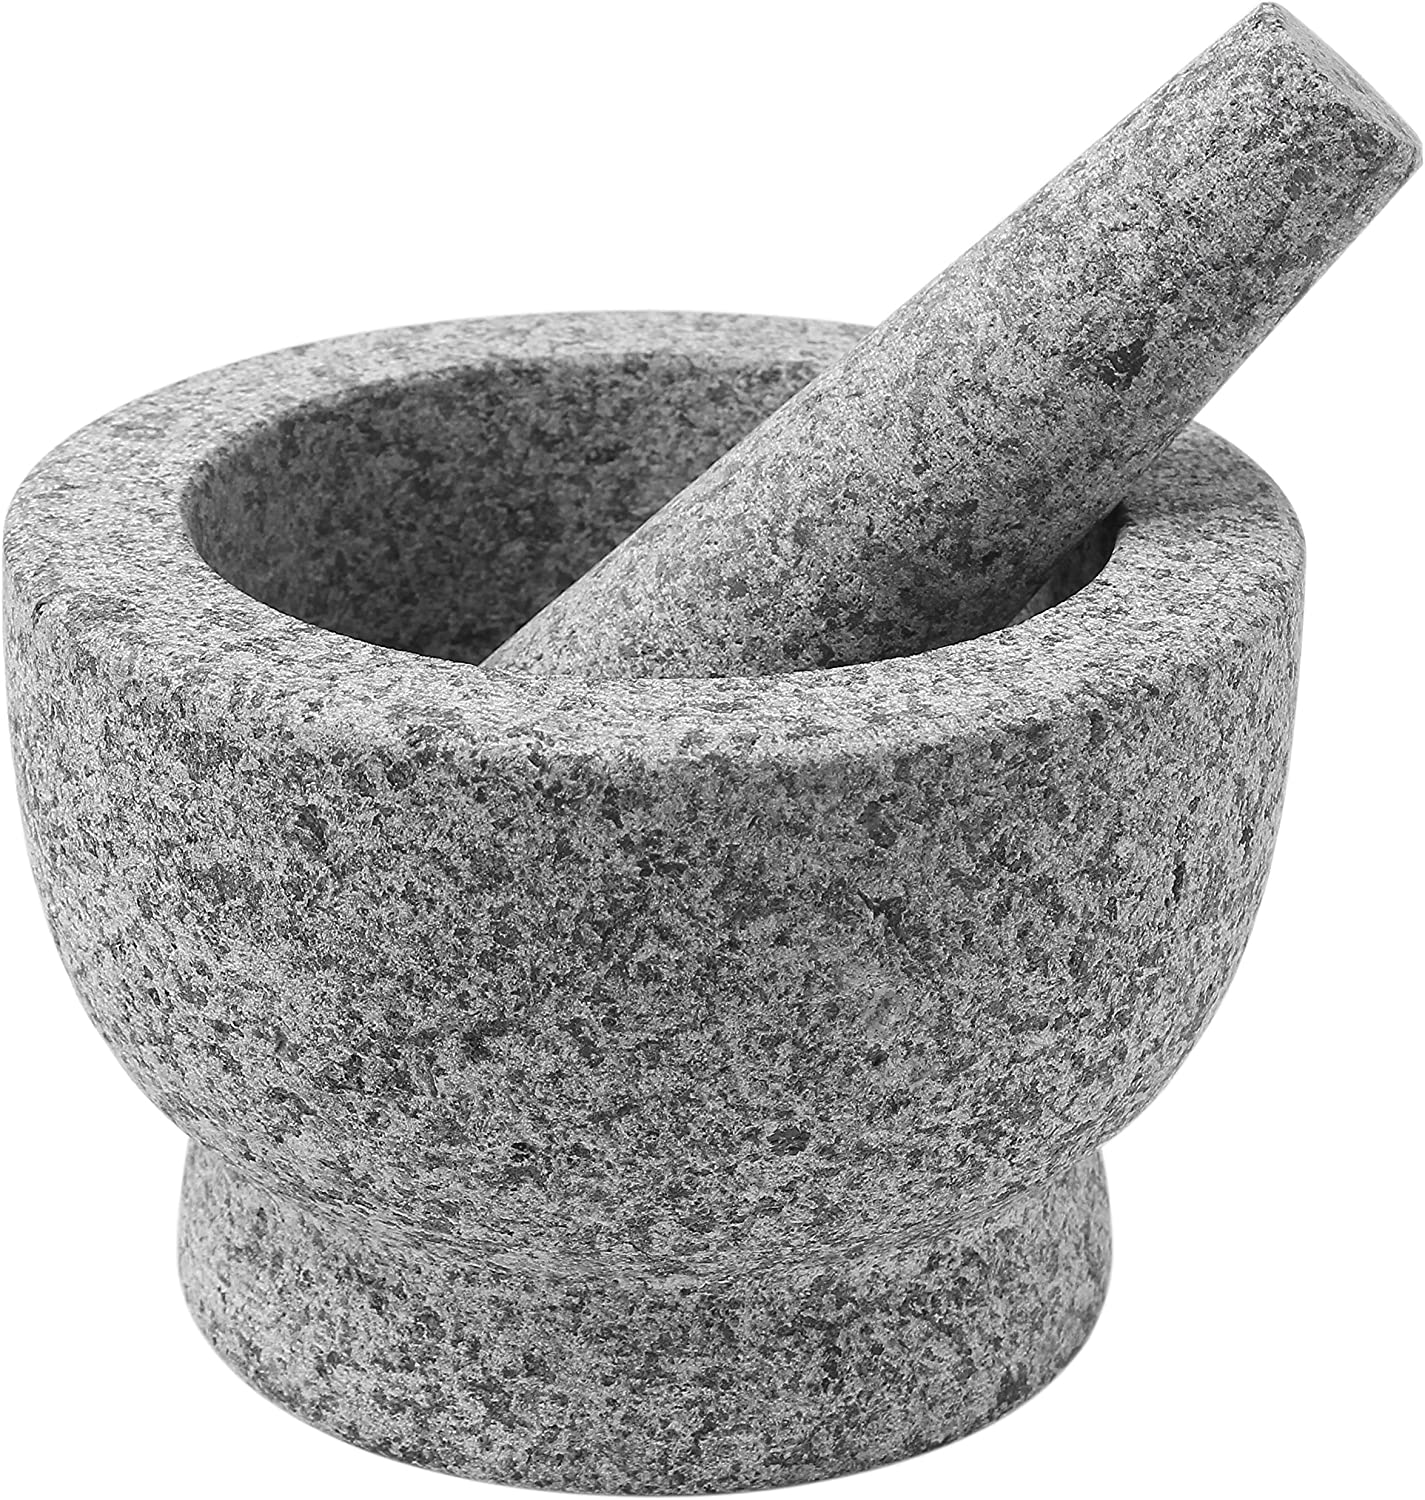 Marble Mortar And Pestle Set - Large Heavy White Marble - Quality Herb and  Spice Grinder - Mortar Pestle Set - Gift for Mom